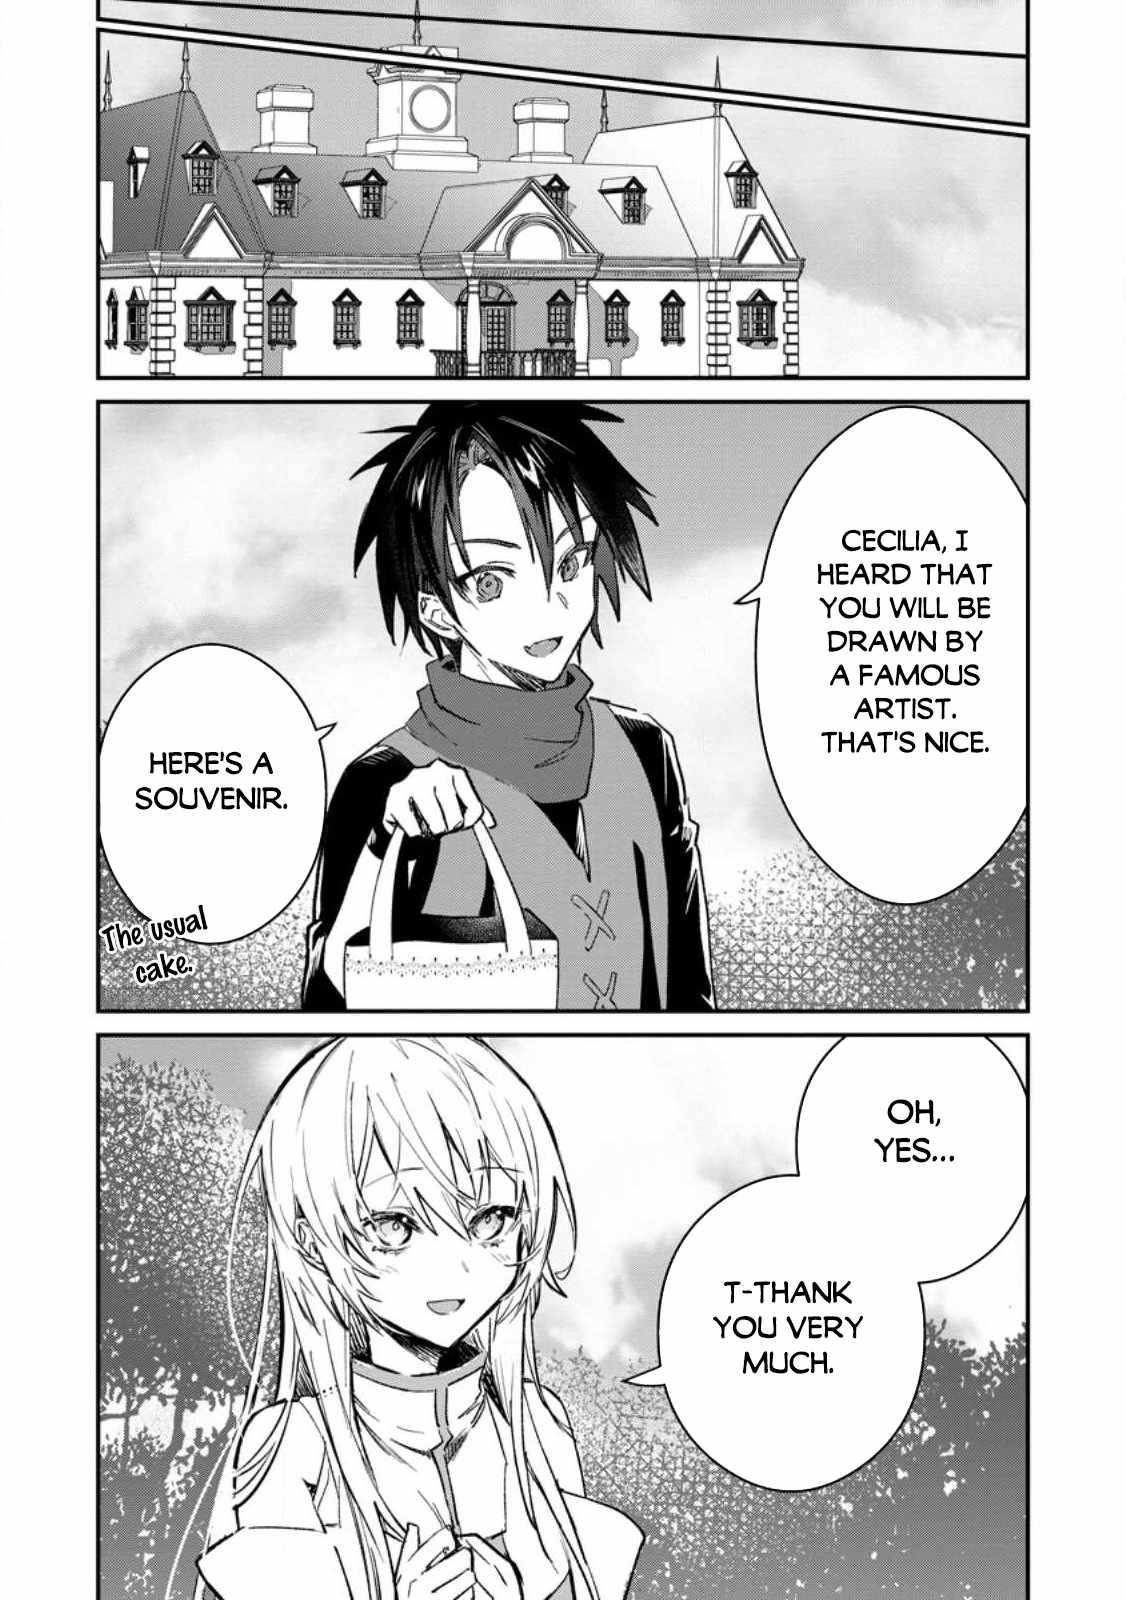 There Was a Cute Girl in the Hero's Party, so I Tried Confessing to Her  Manga Reading Free Online